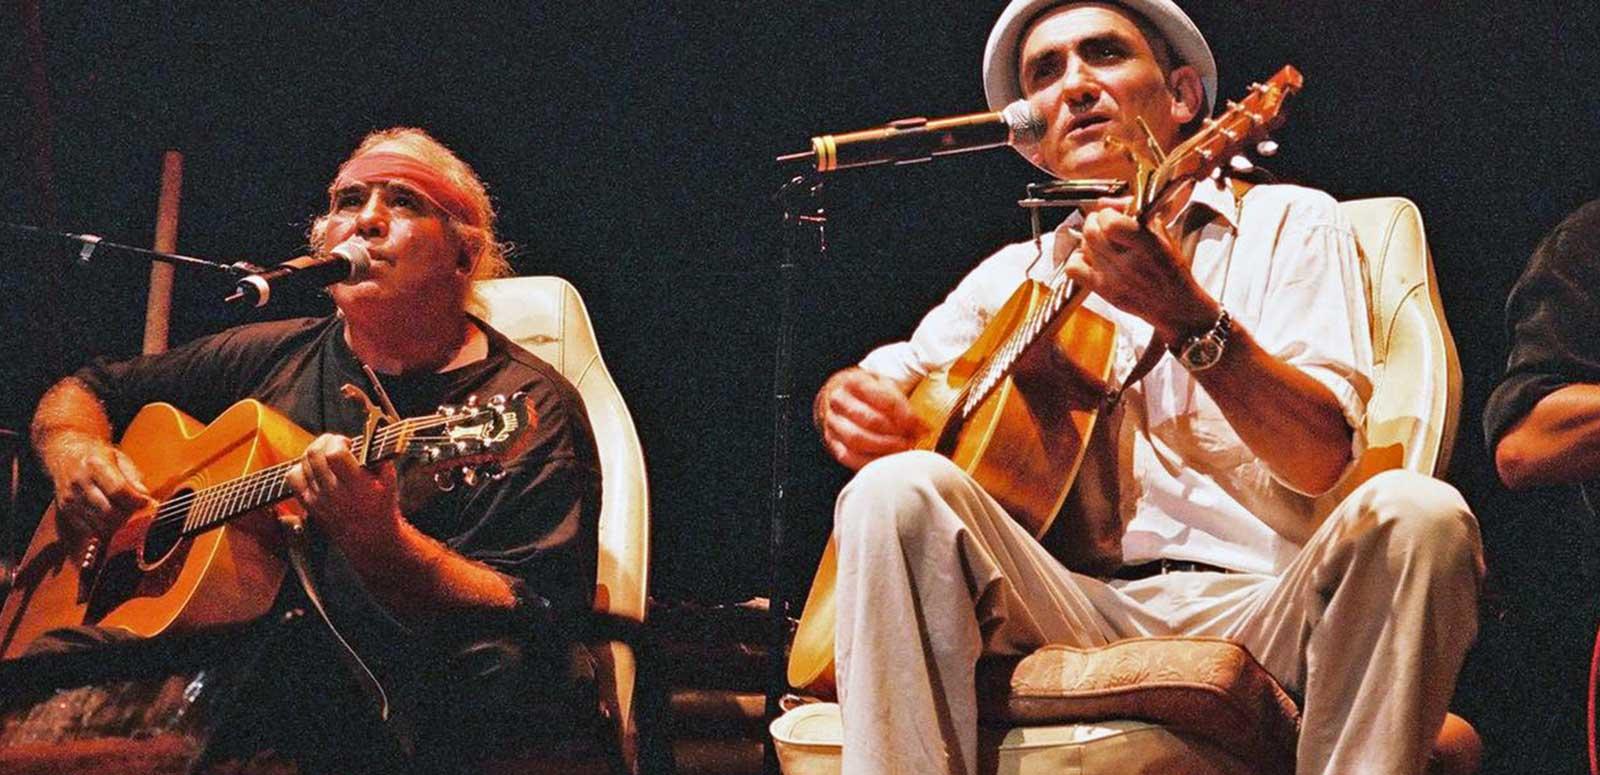 Kev Carmody and Paul Kelly on a stage seated in front of microphones and playing their guitars.